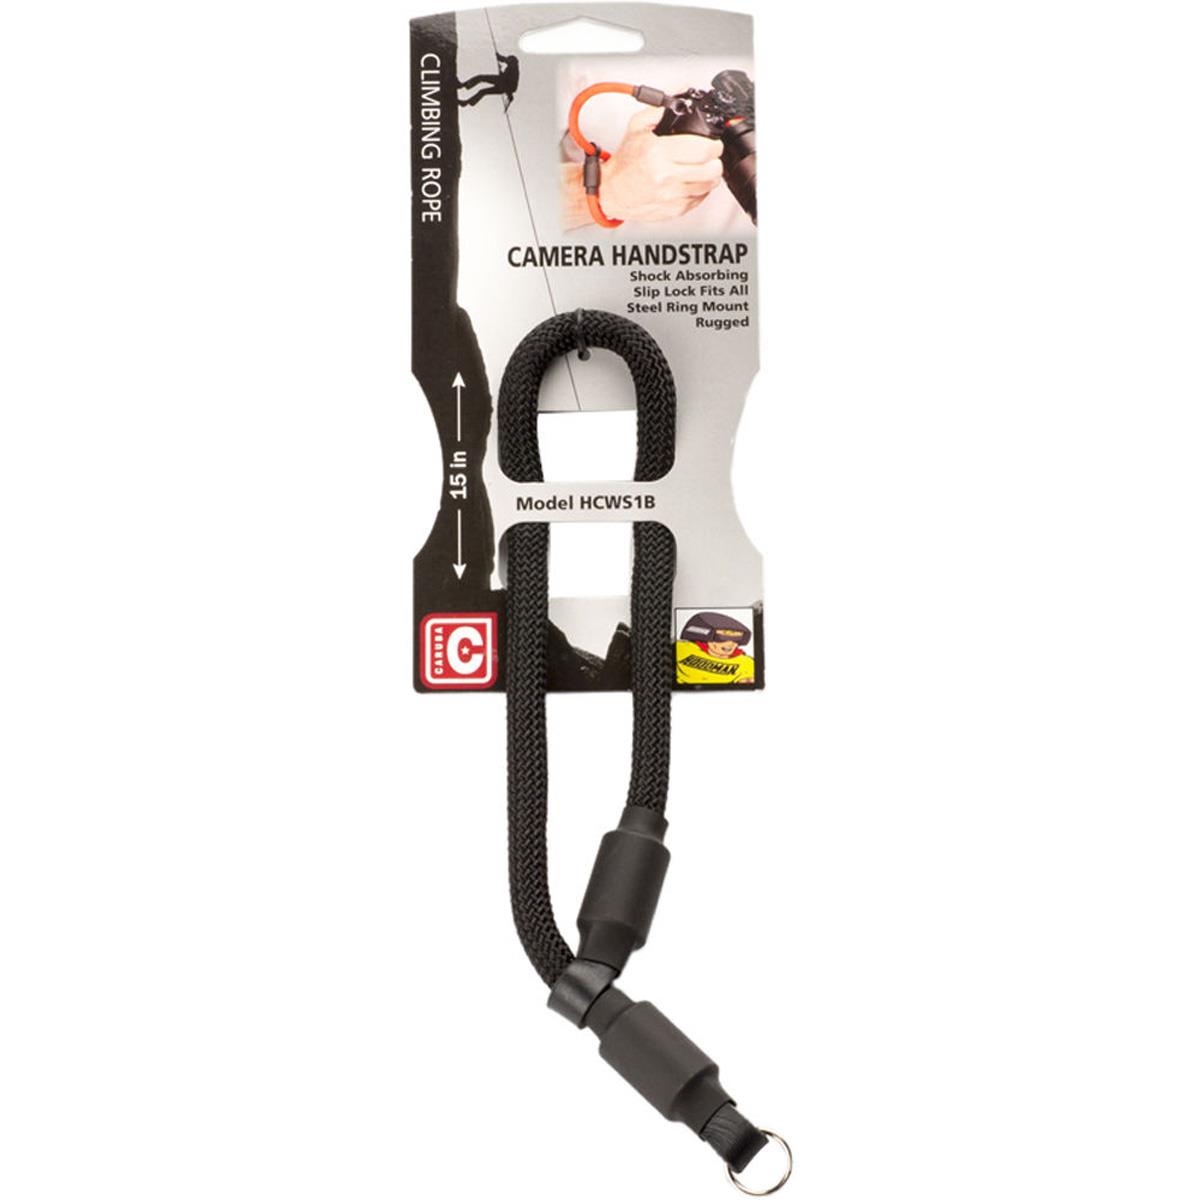 Image of Hoodman 10mm Climbing Rope Handstrap for Camera with Lens Up to 5 Lbs